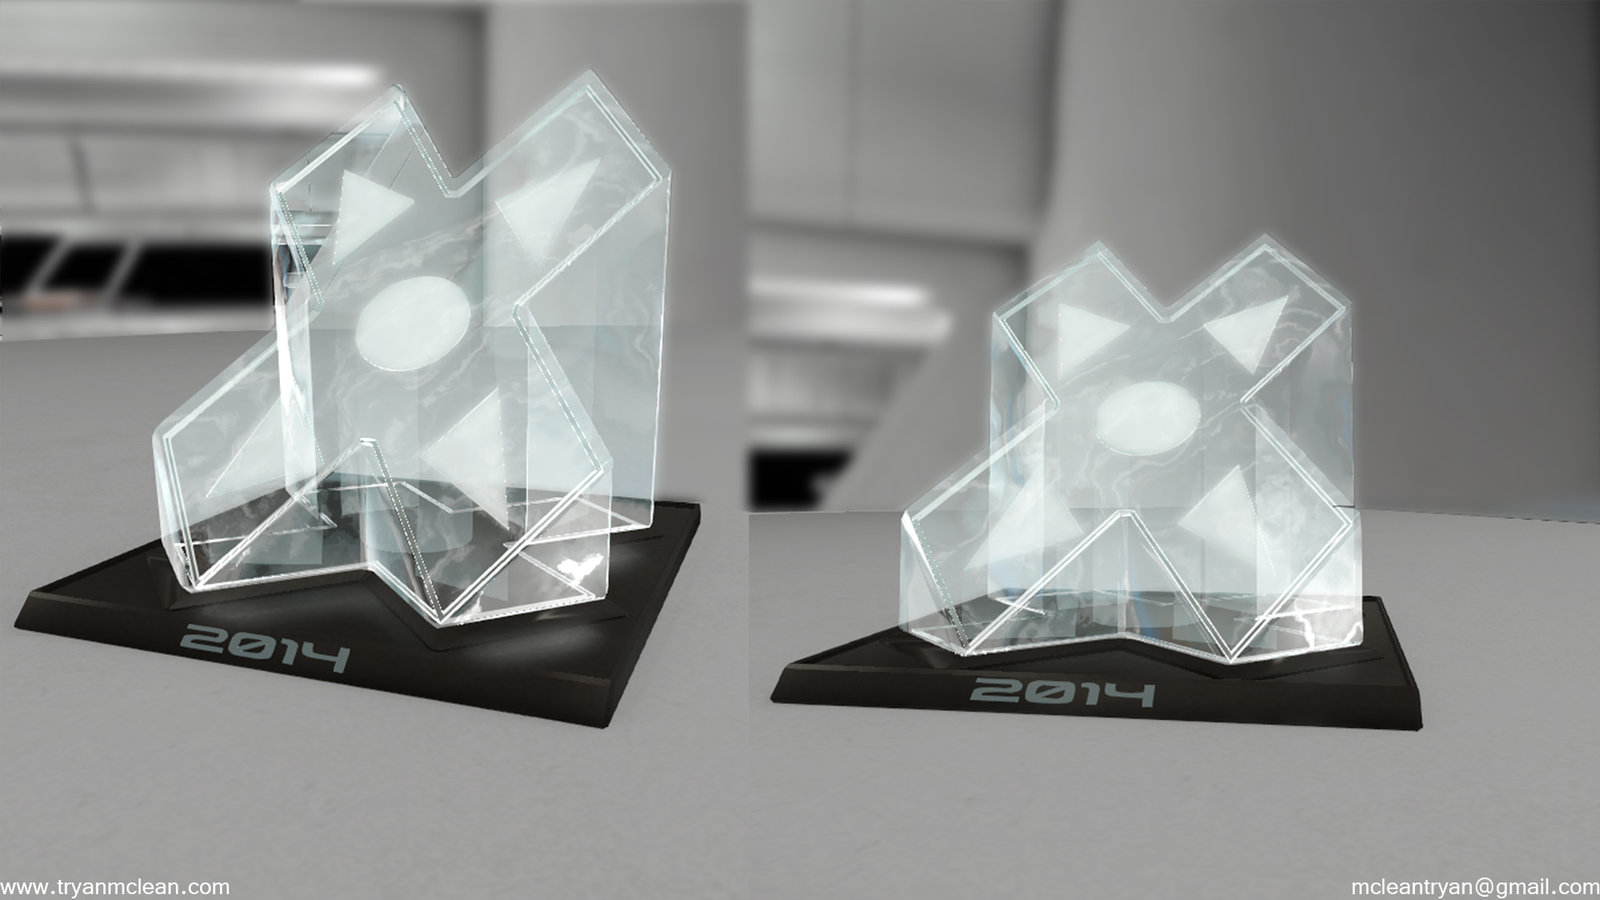 Star Citizen Subscriber Flair Trophy. Modelling by myself, material by myself. 